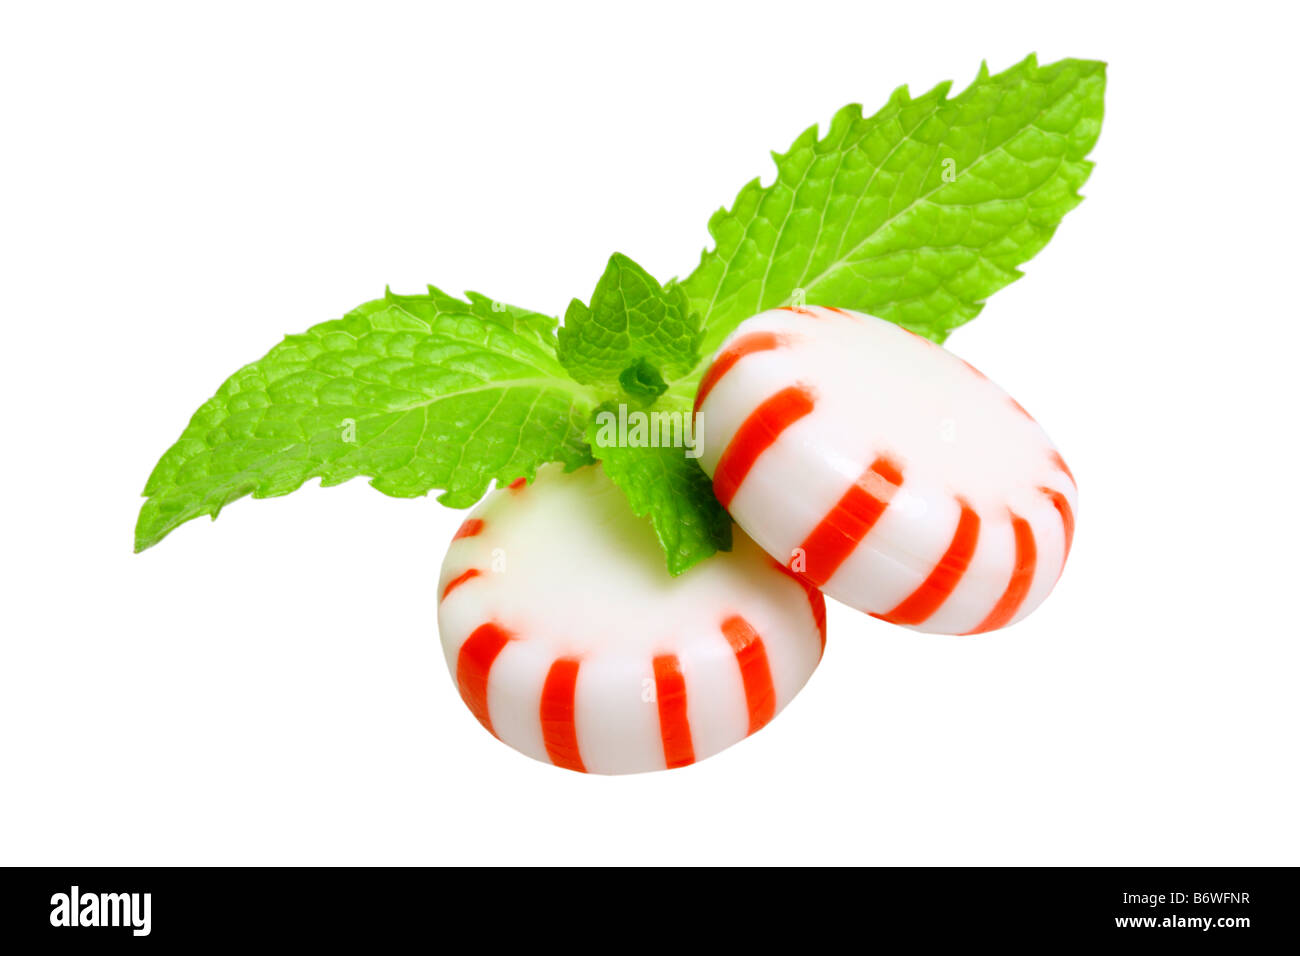 Peppermint candies and mint leaves cut out isolated on white background Stock Photo